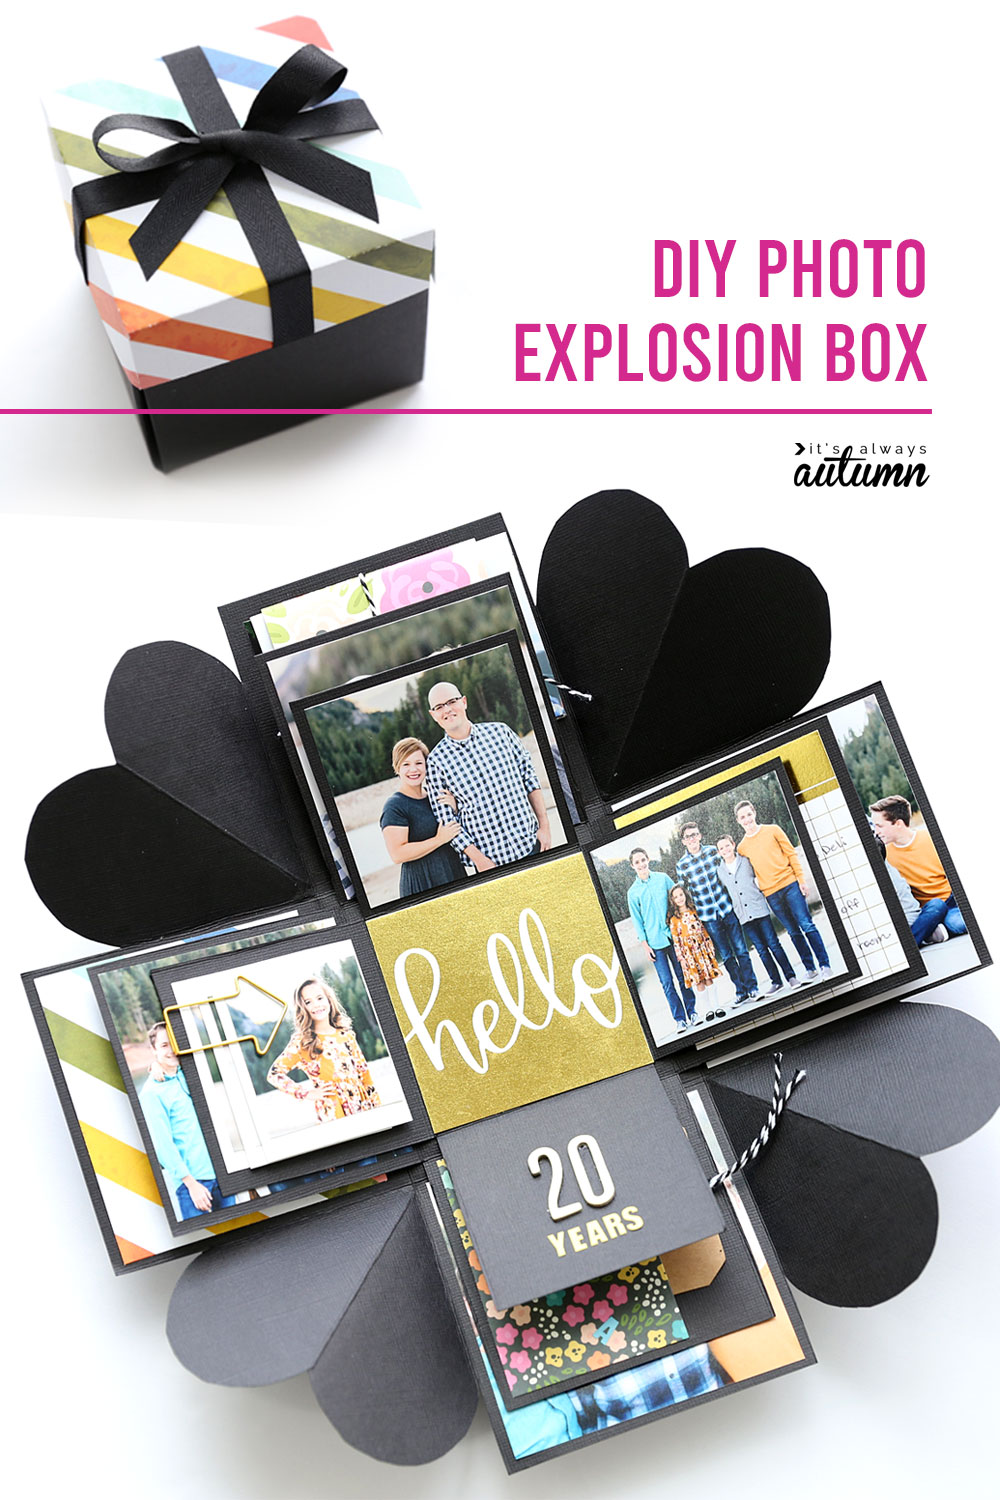 Step-by-Step Guide for How to Make a DIY Explosion Box